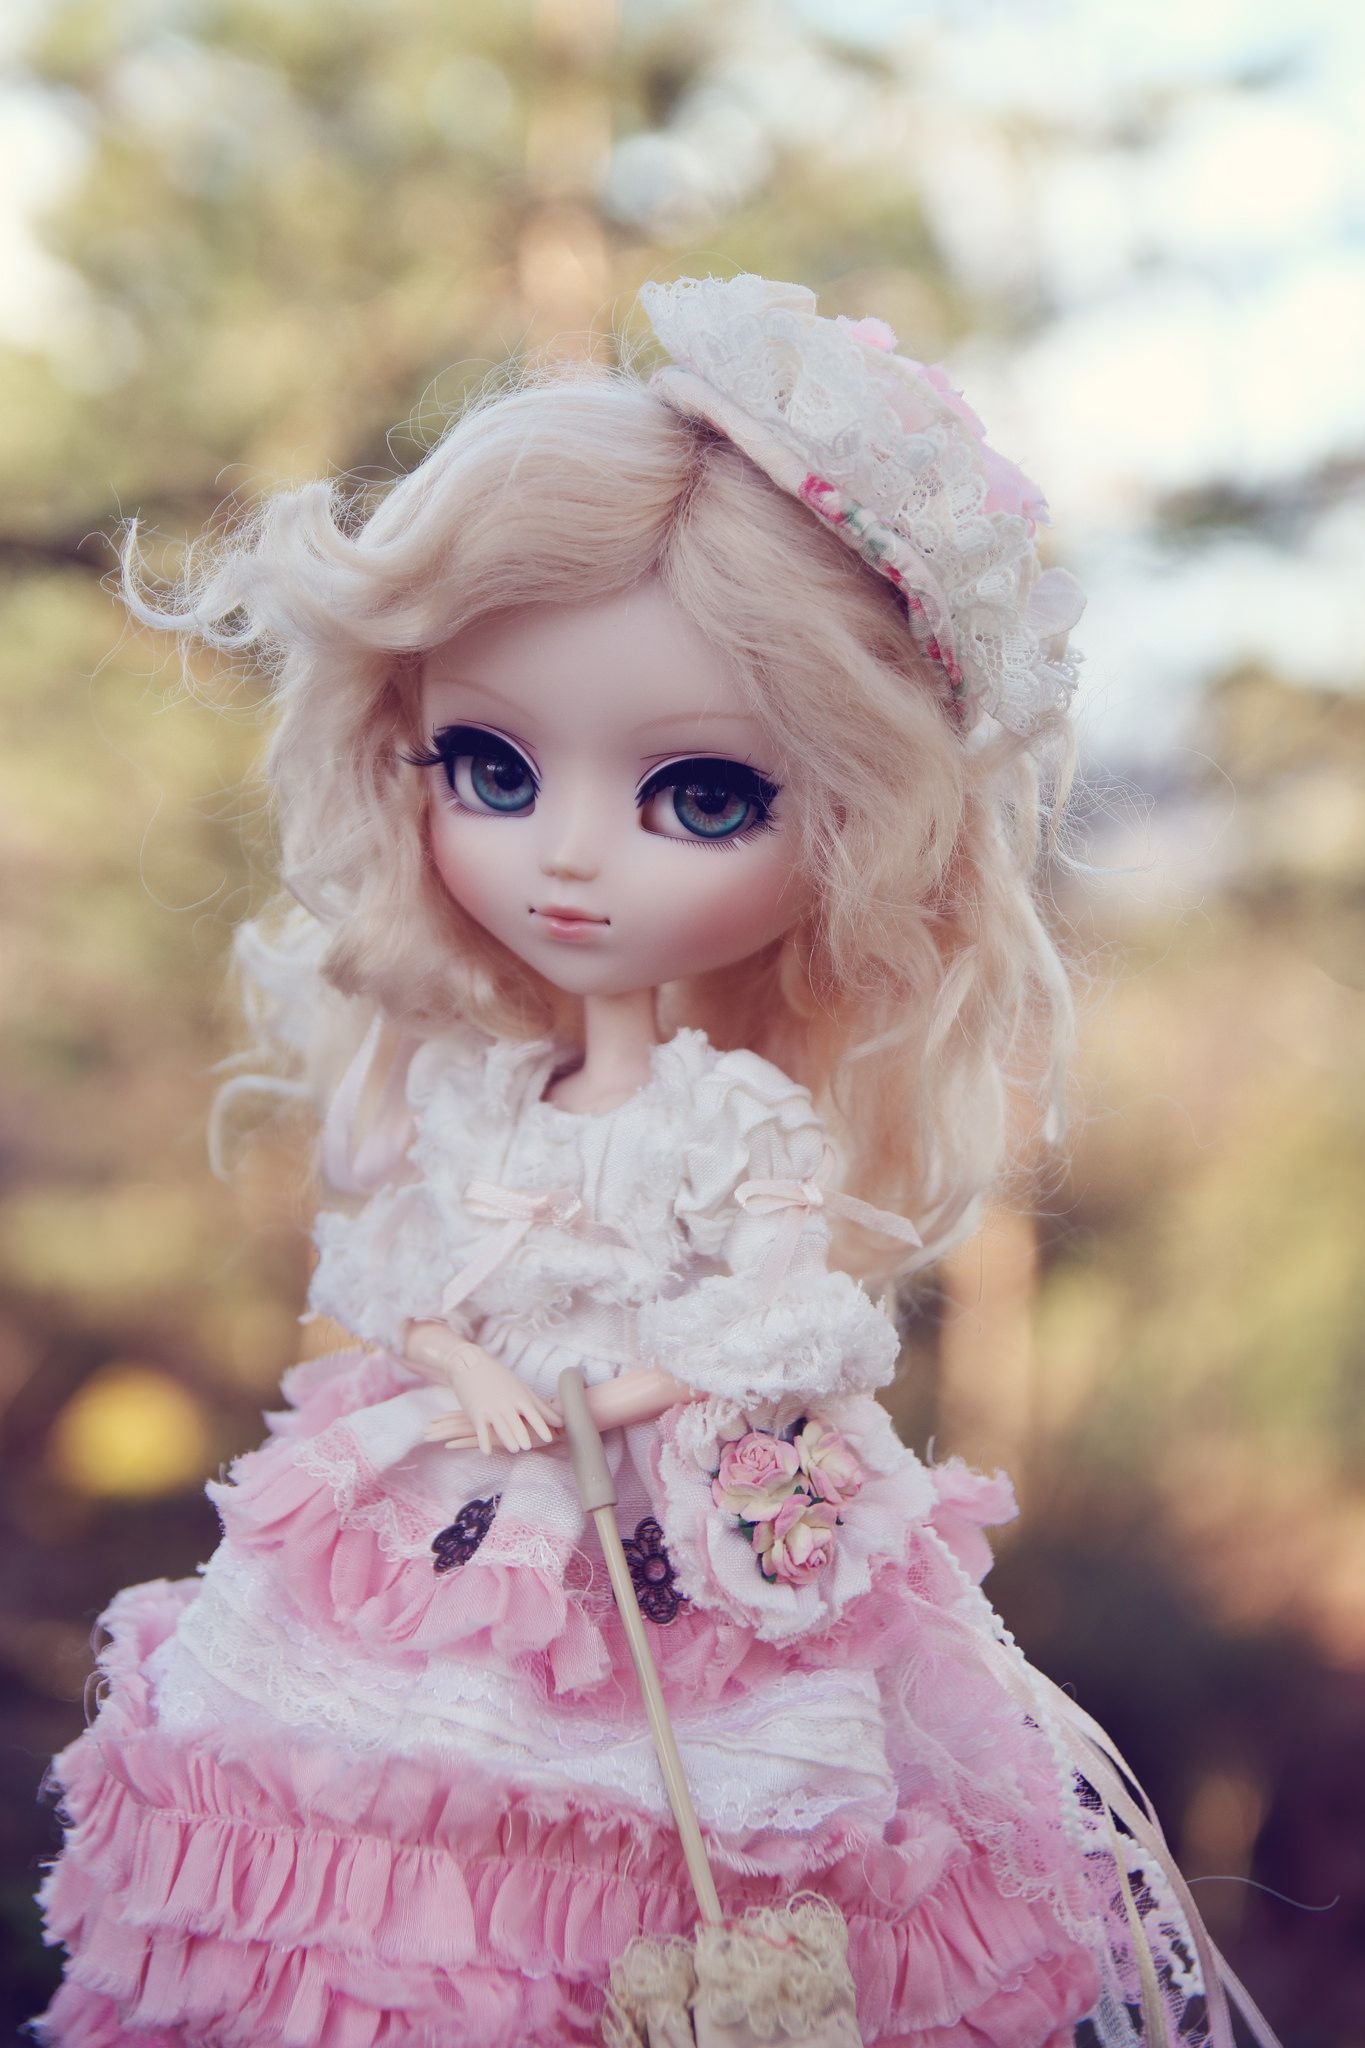 A Beautiful Doll PICture For DP